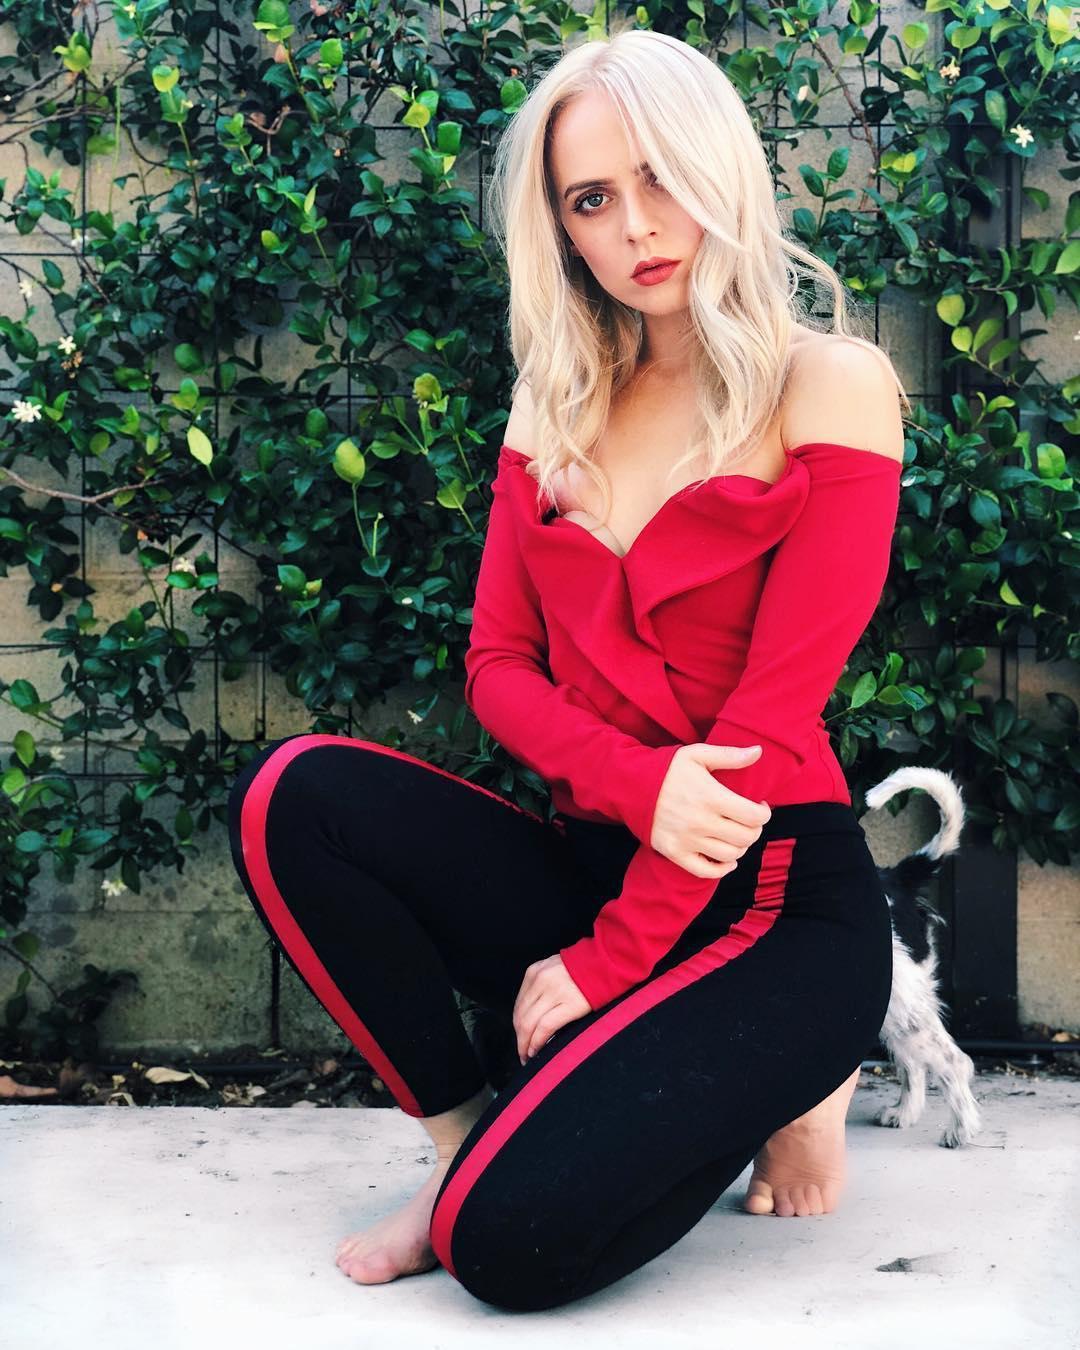 madilyn bailey boobs pictures.